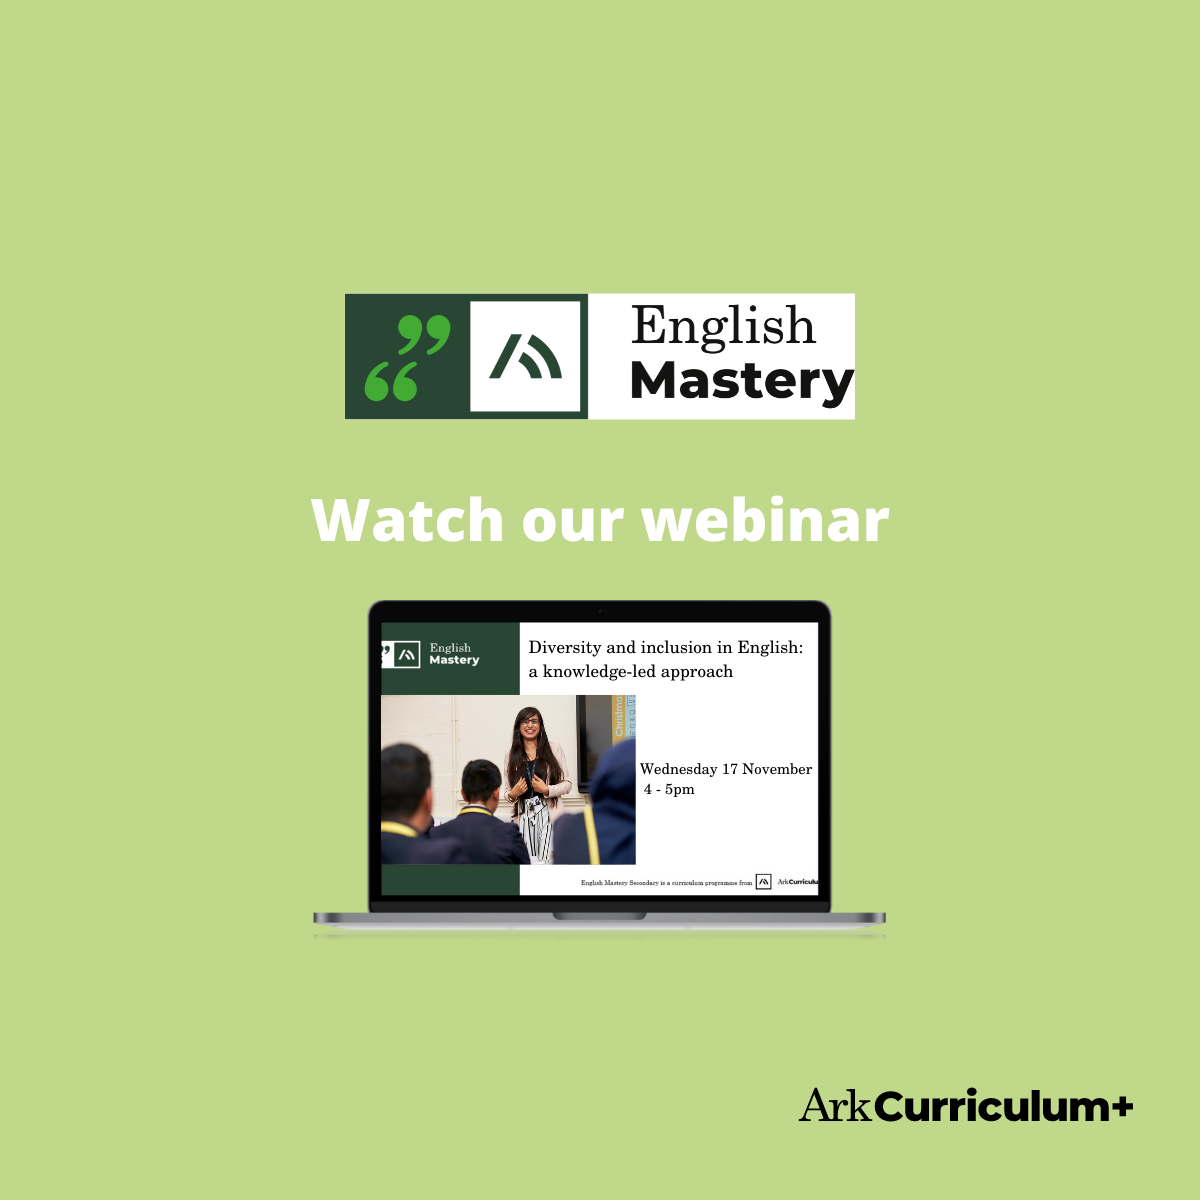 Watch our webinar: Diversity and inclusion in English: a knowledge-led approach